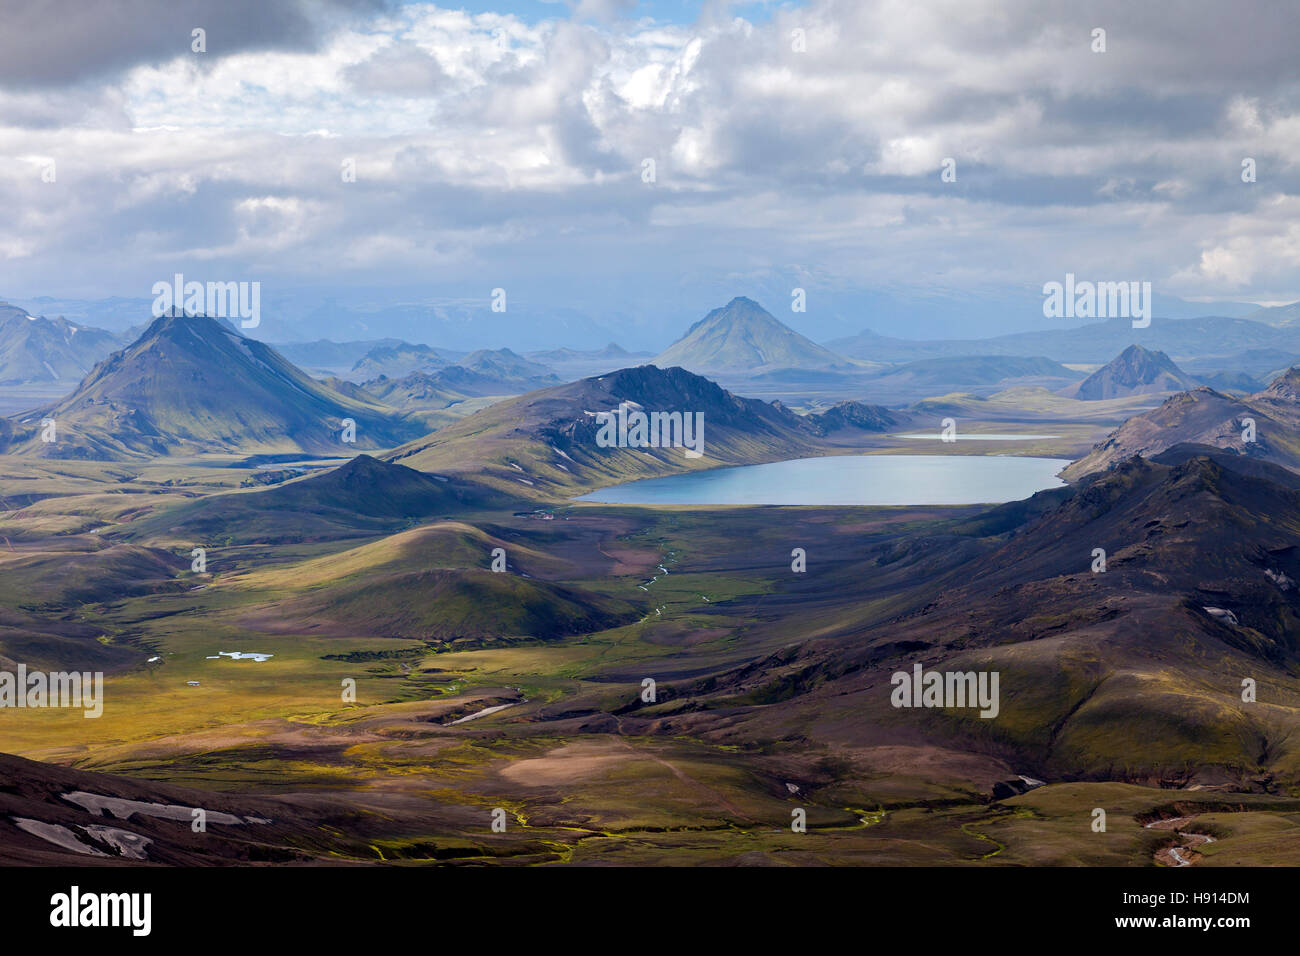 The Lake of Alftavatn Viewed From the Upper Slopes of Jokultungur on the Laugavegur Hiking Trail Iceland Stock Photo